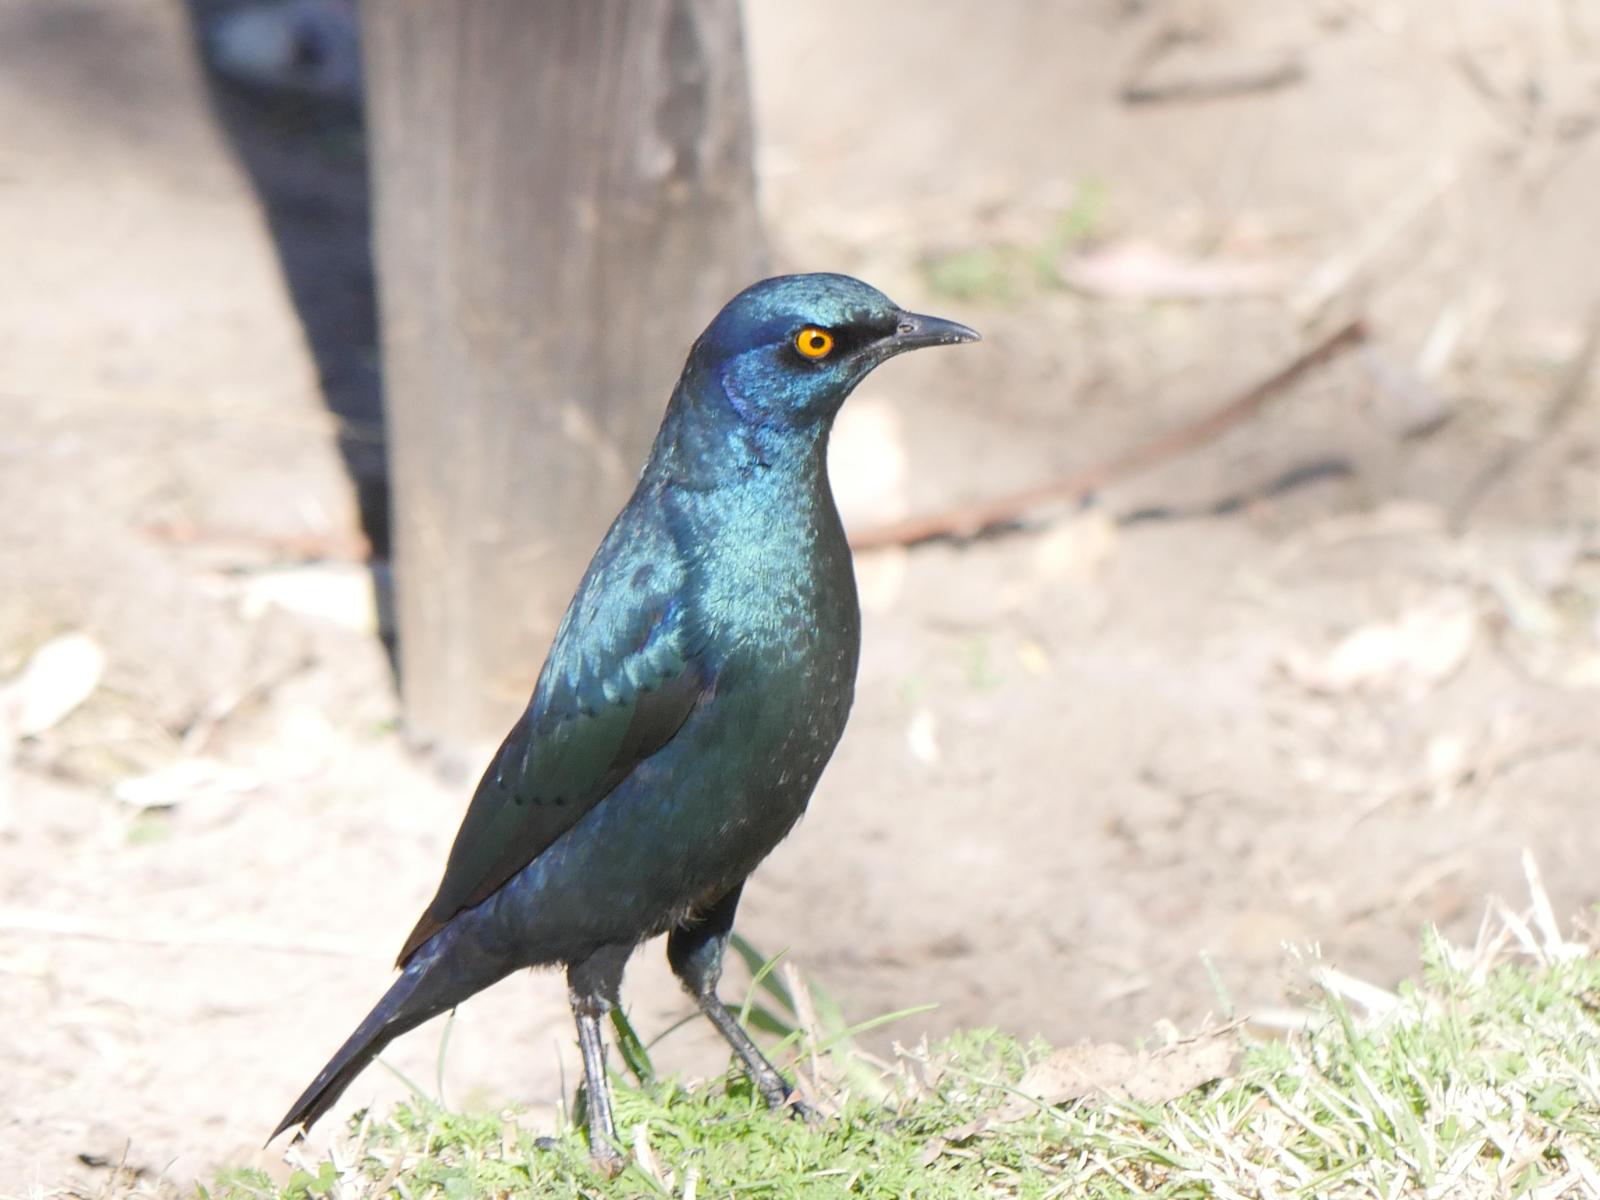 Cape Starling Photo by Peter Lowe